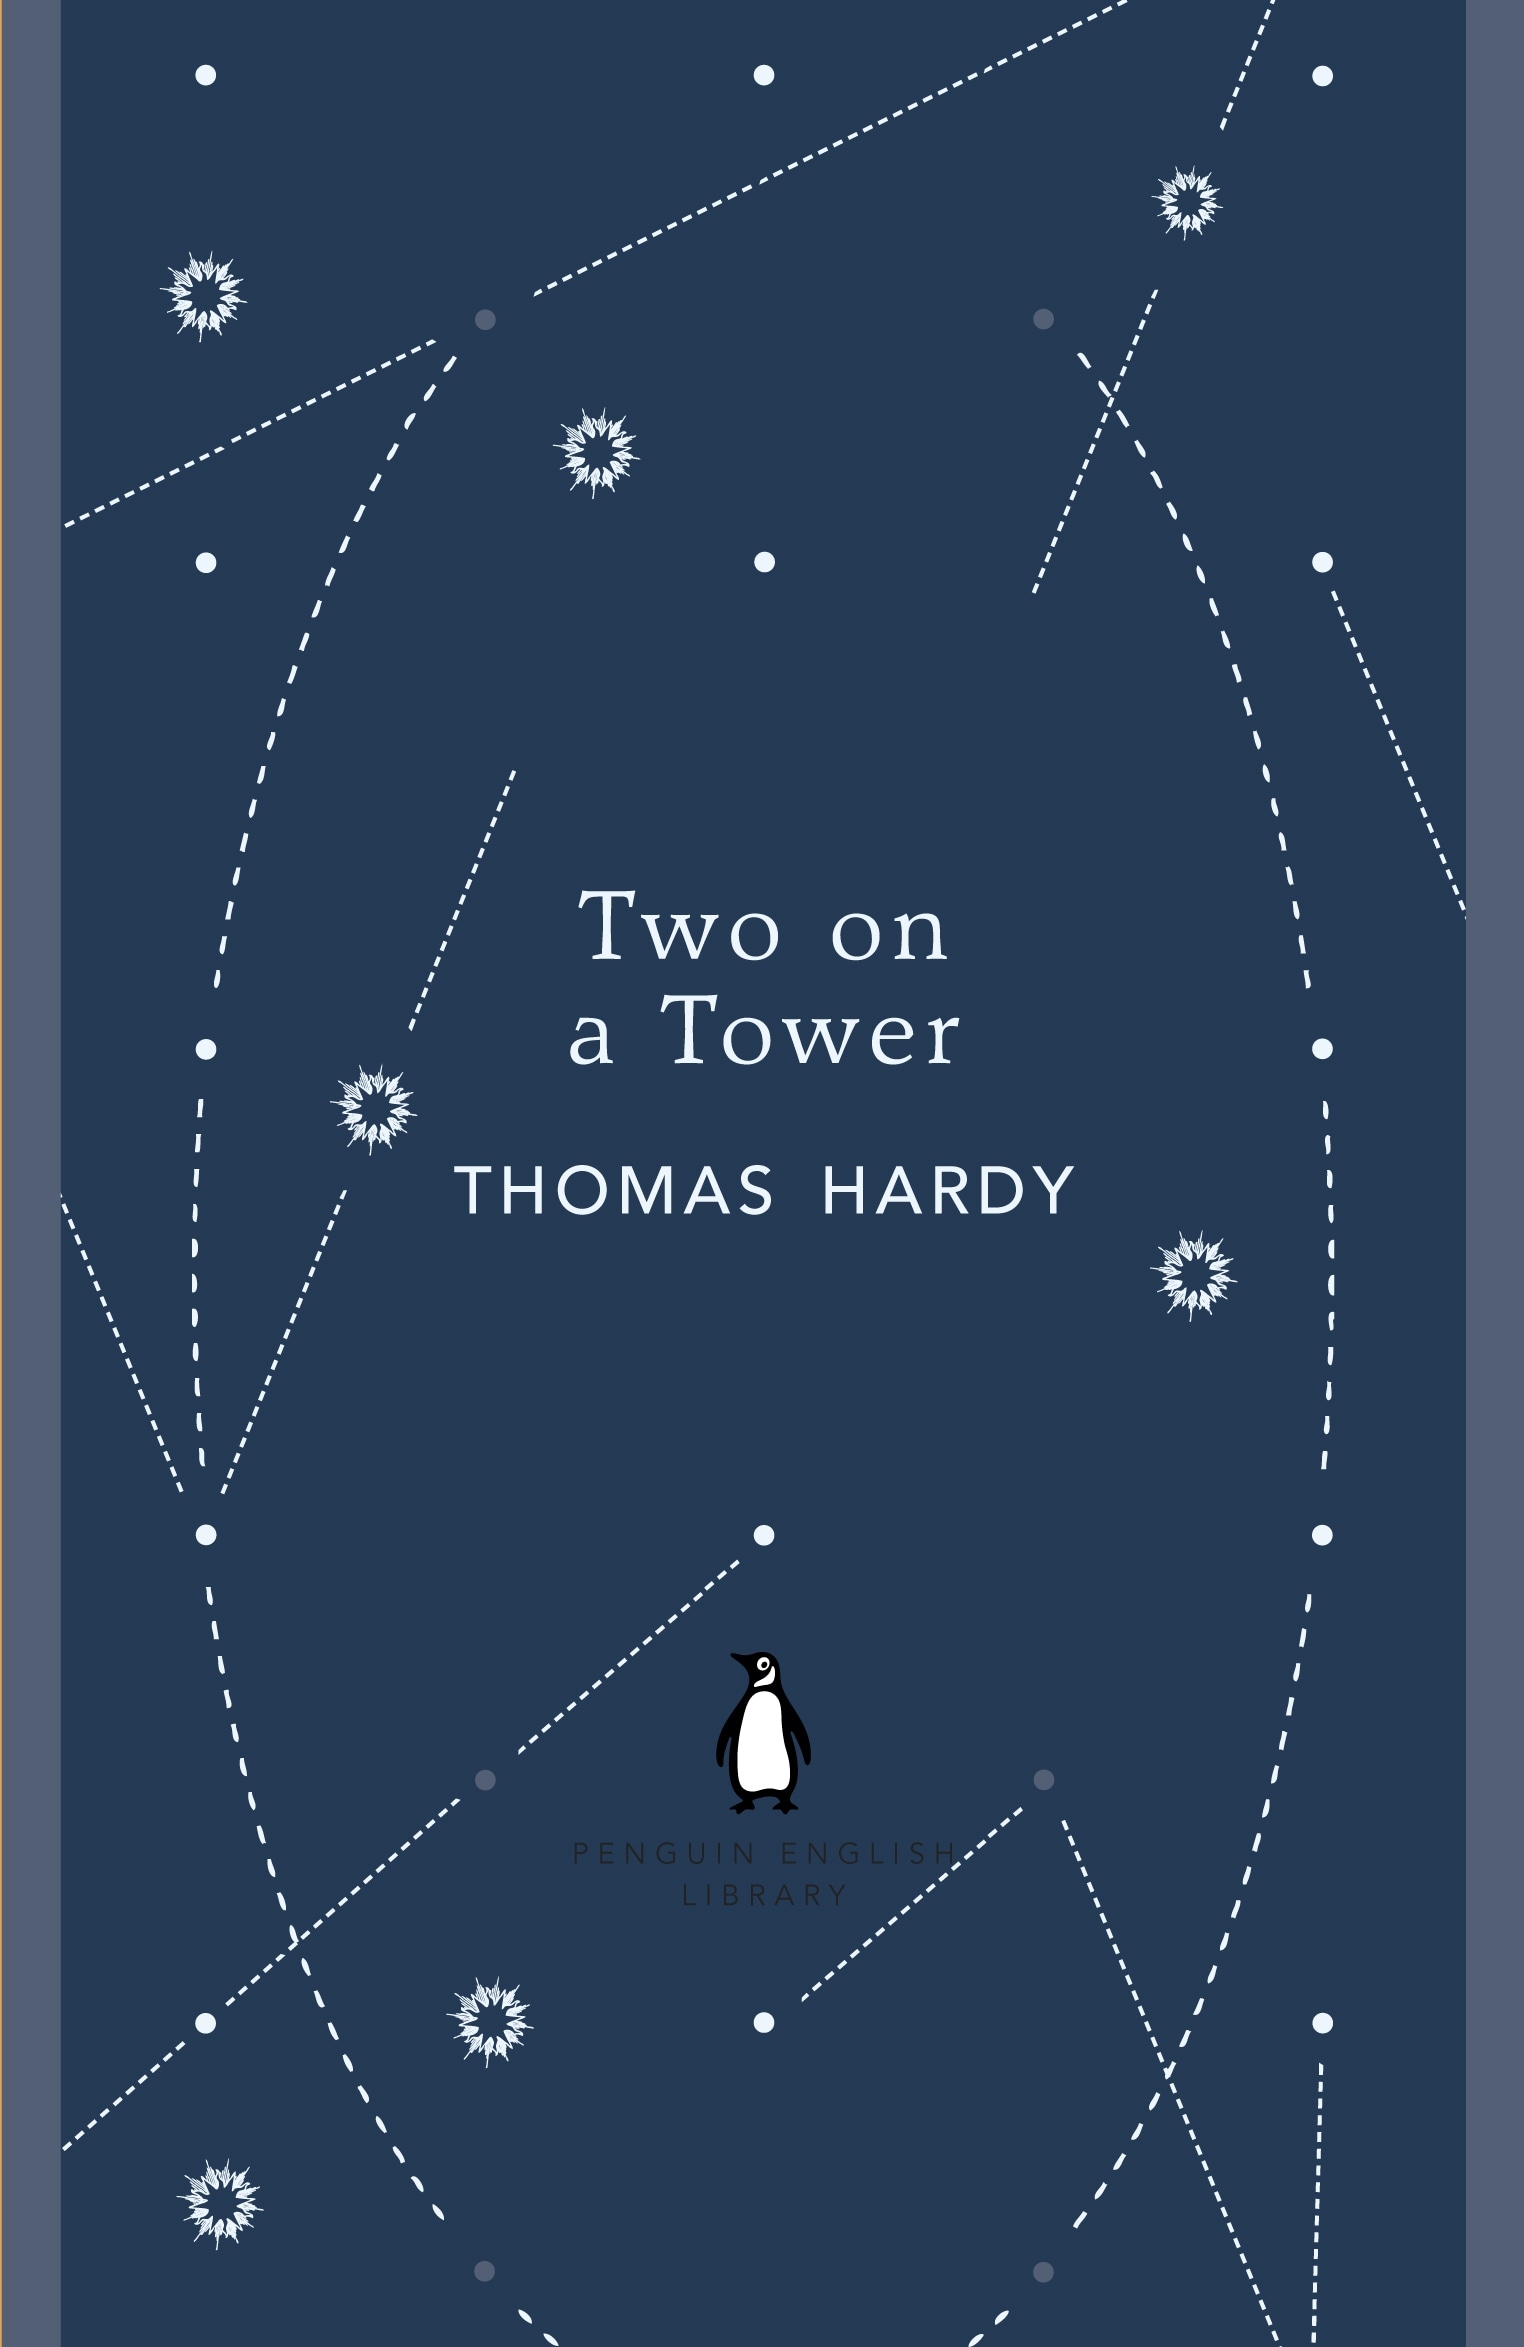 Book “Two on a Tower” by Thomas Hardy — June 28, 2012